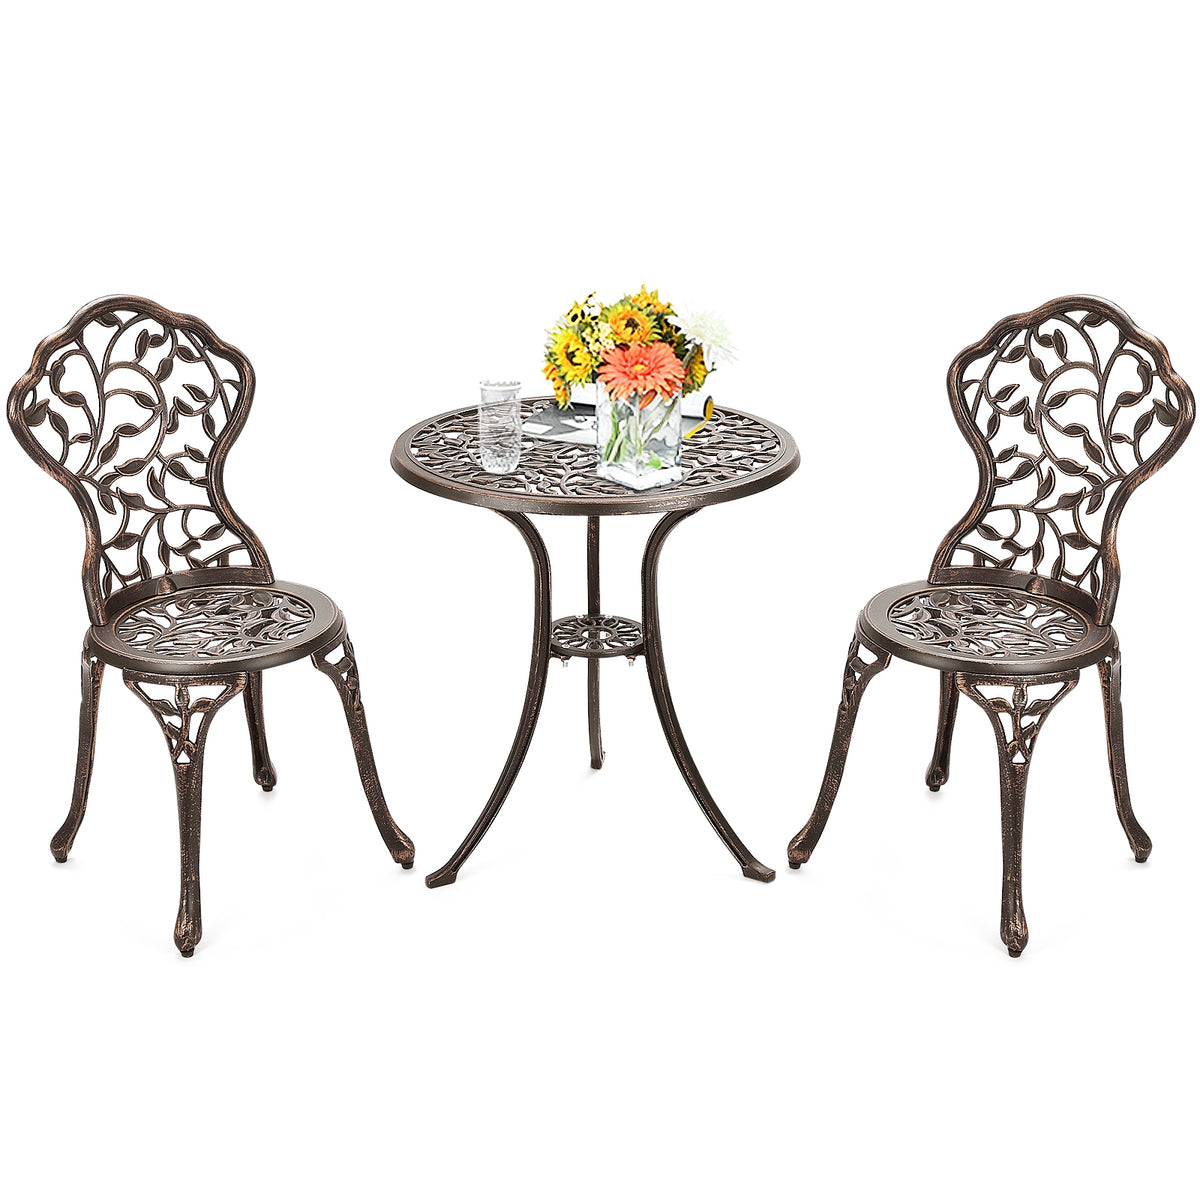 Hikidspace 3 Pcs Cast Aluminum Bistro Set for Outdoor Patio and Poolside